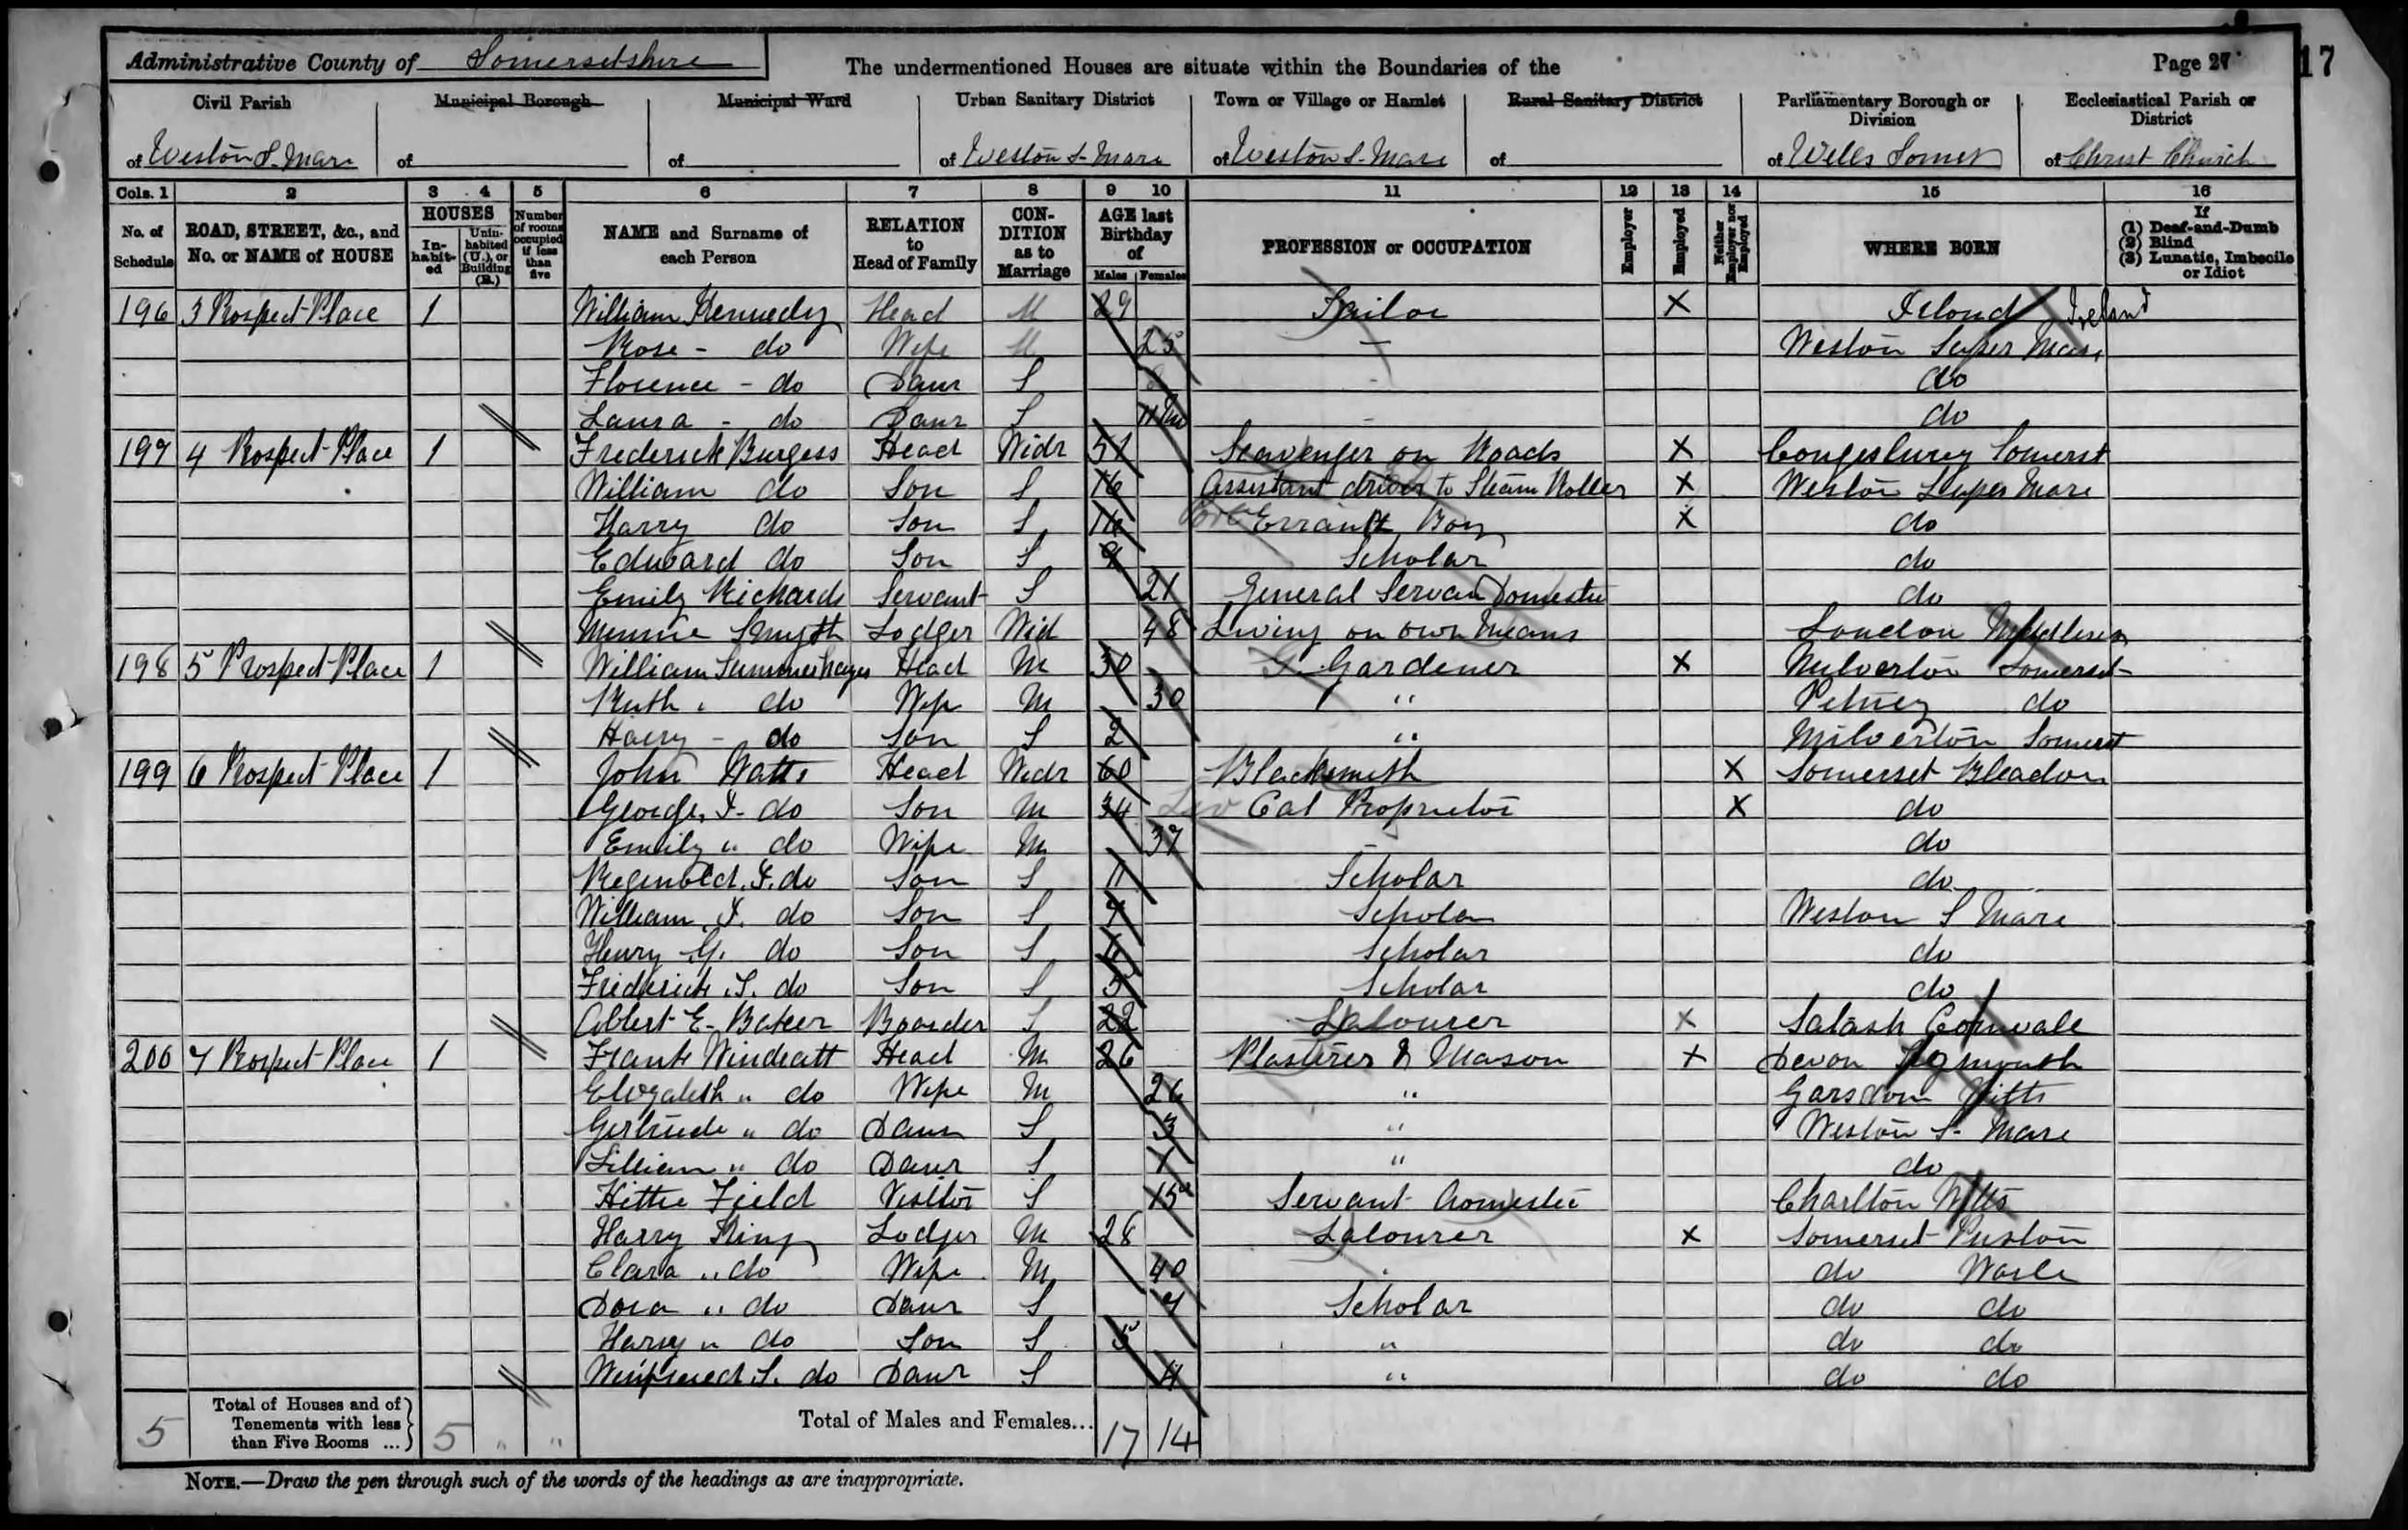 A Page from the 1891 Census